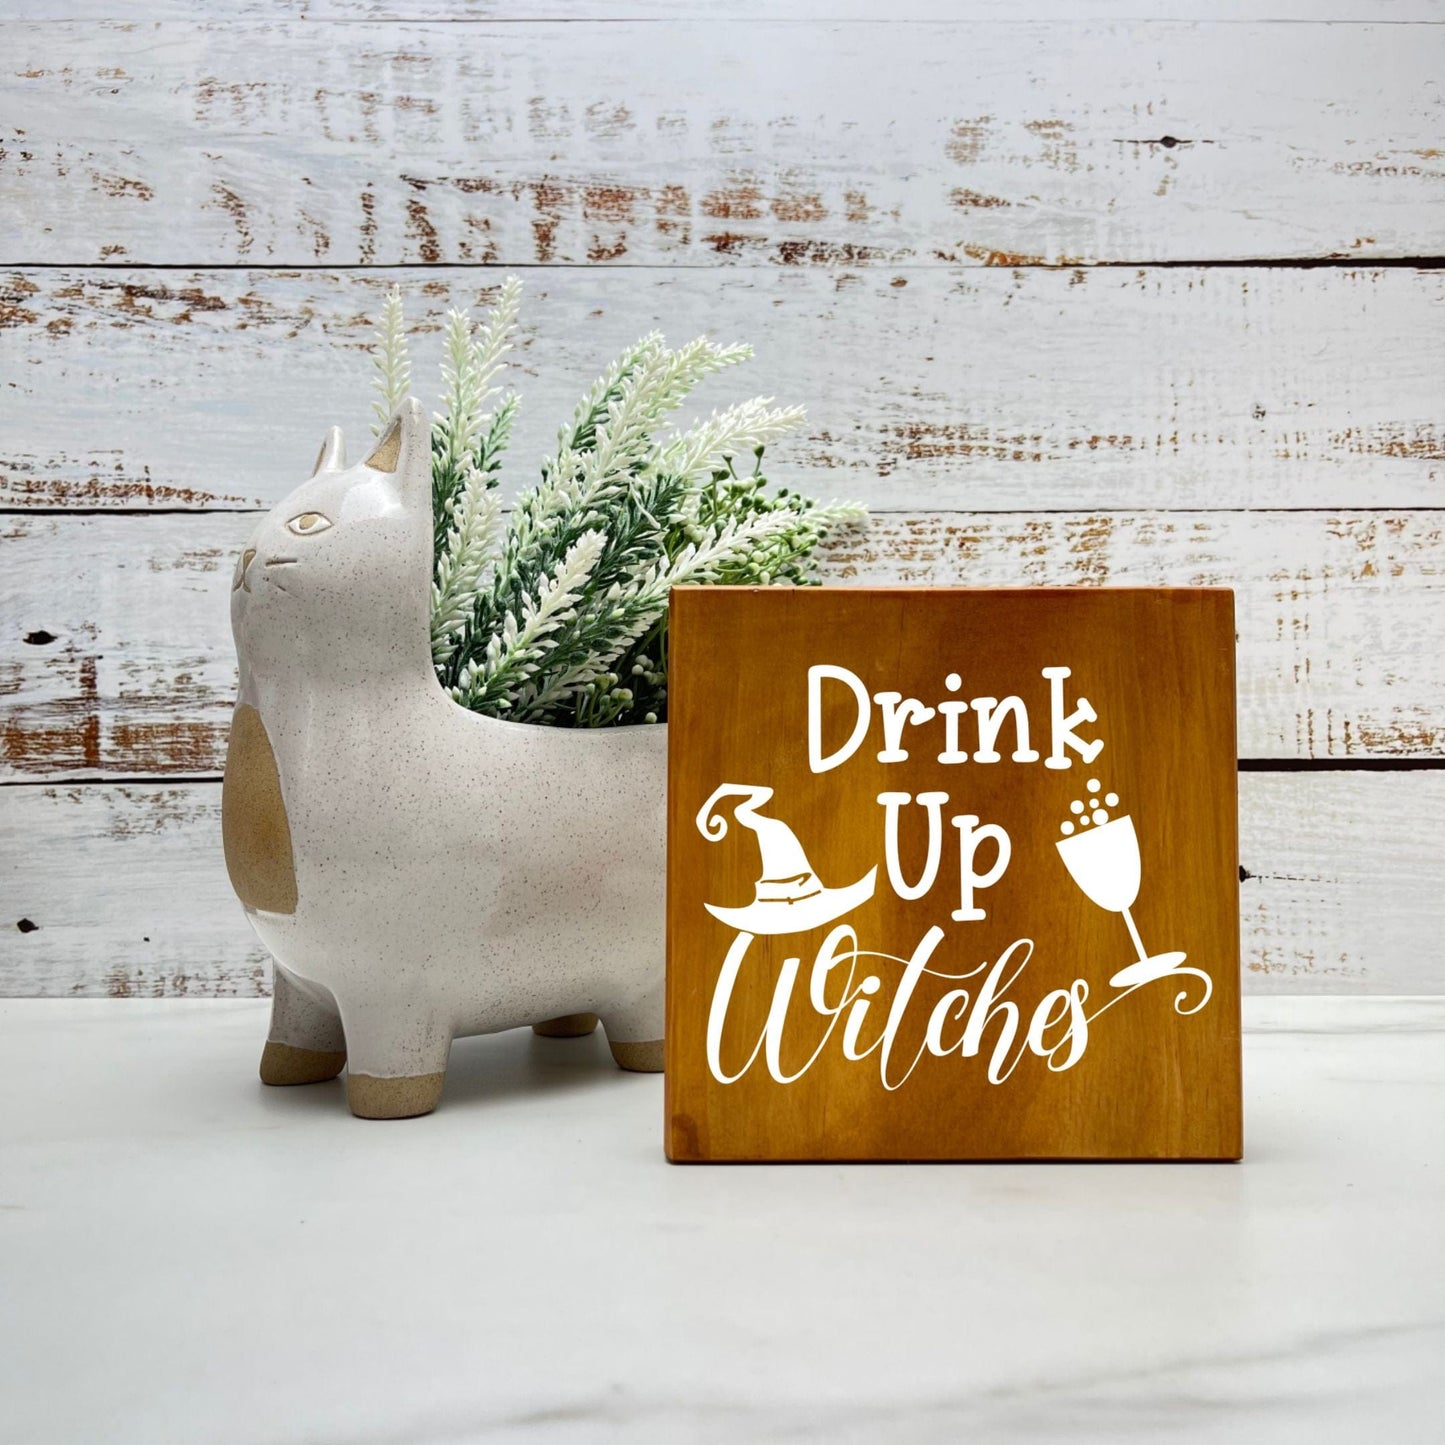 Drink up witches Wood Sign, Halloween Wood Sign, Halloween Home Decor, Spooky Decor